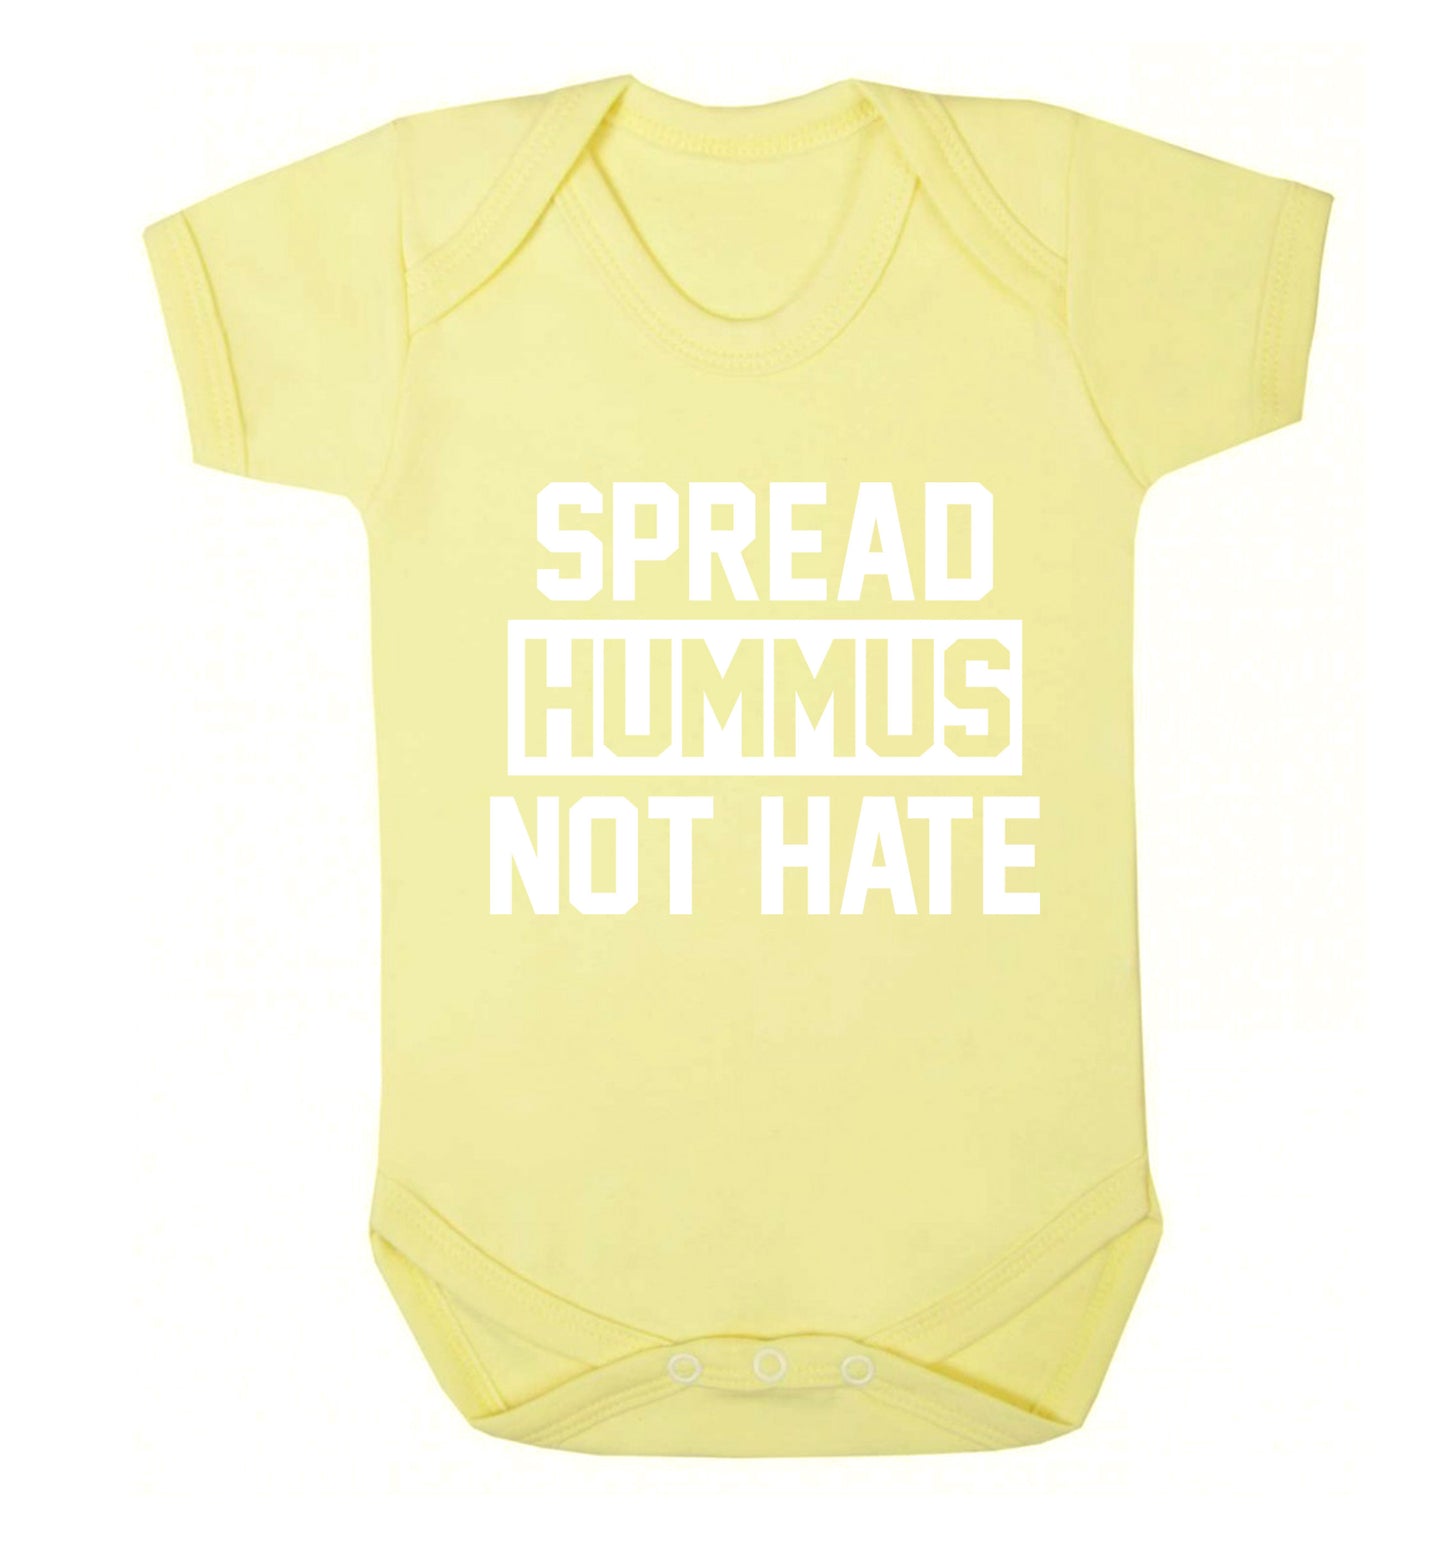 Spread hummus not hate Baby Vest pale yellow 18-24 months